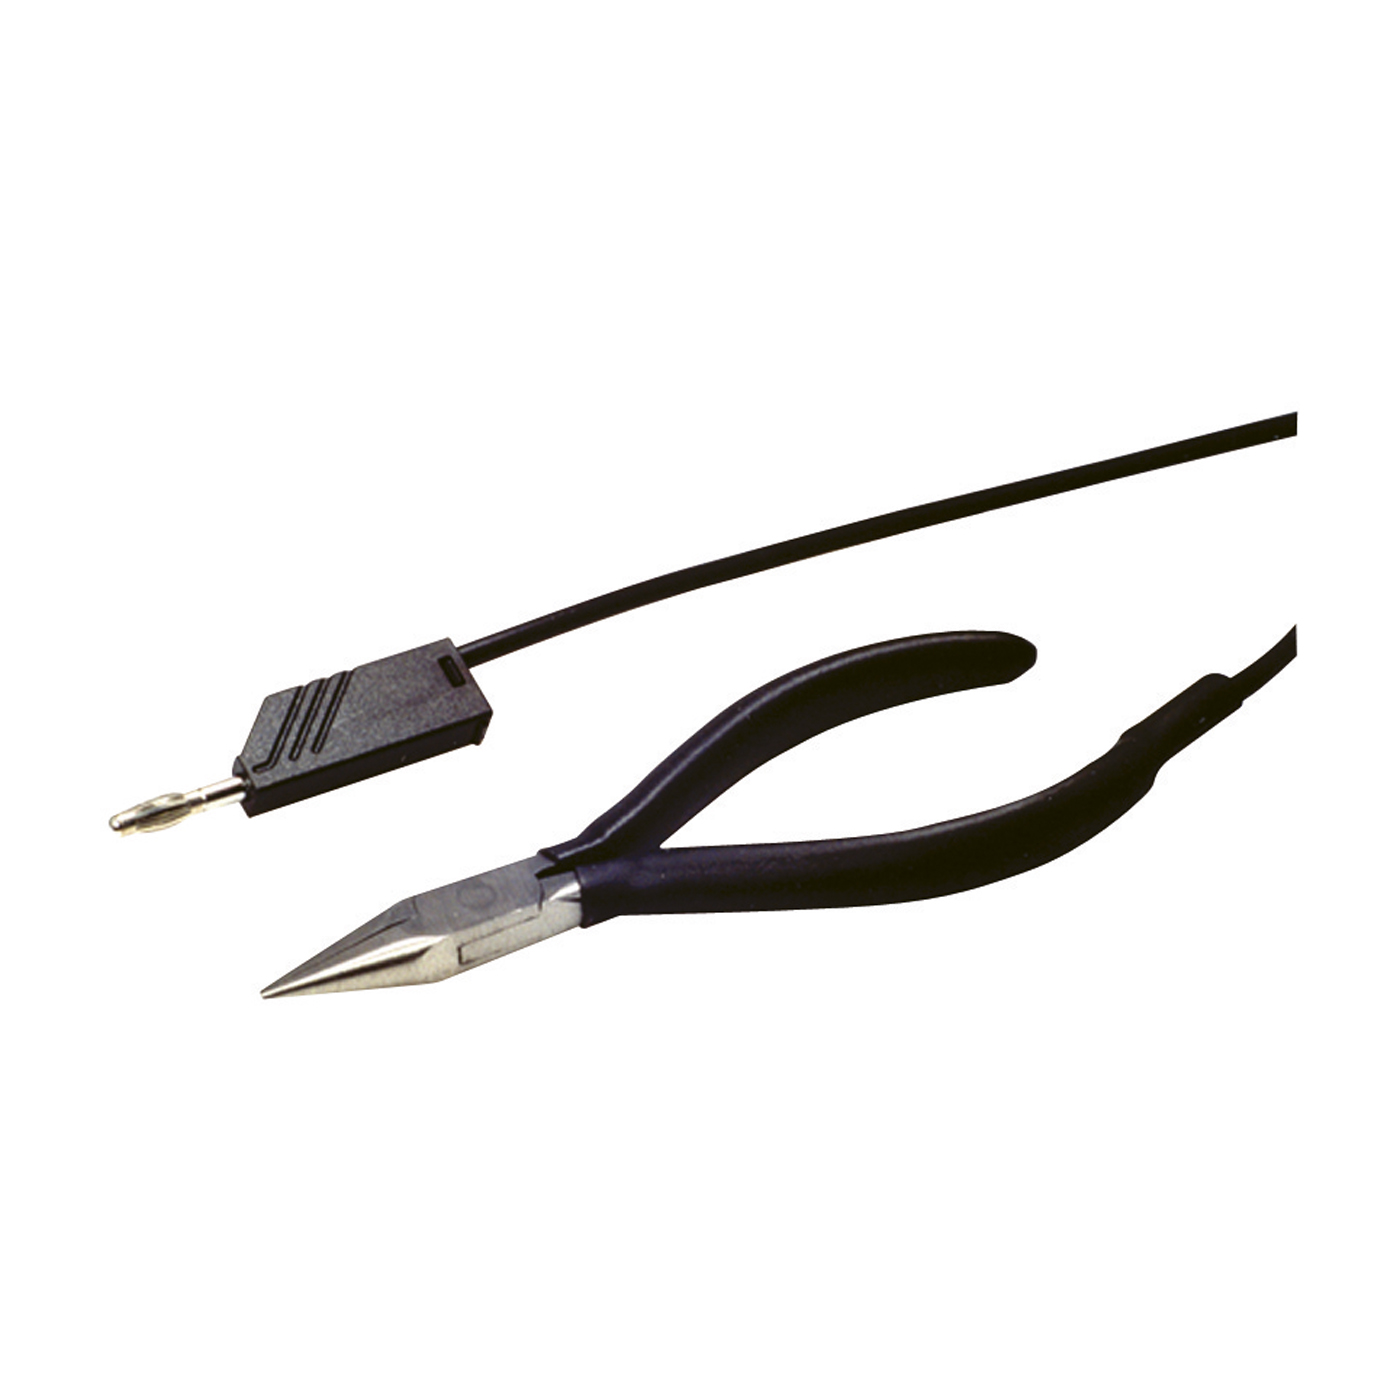 Flat-Pointed Pliers - 1 piece